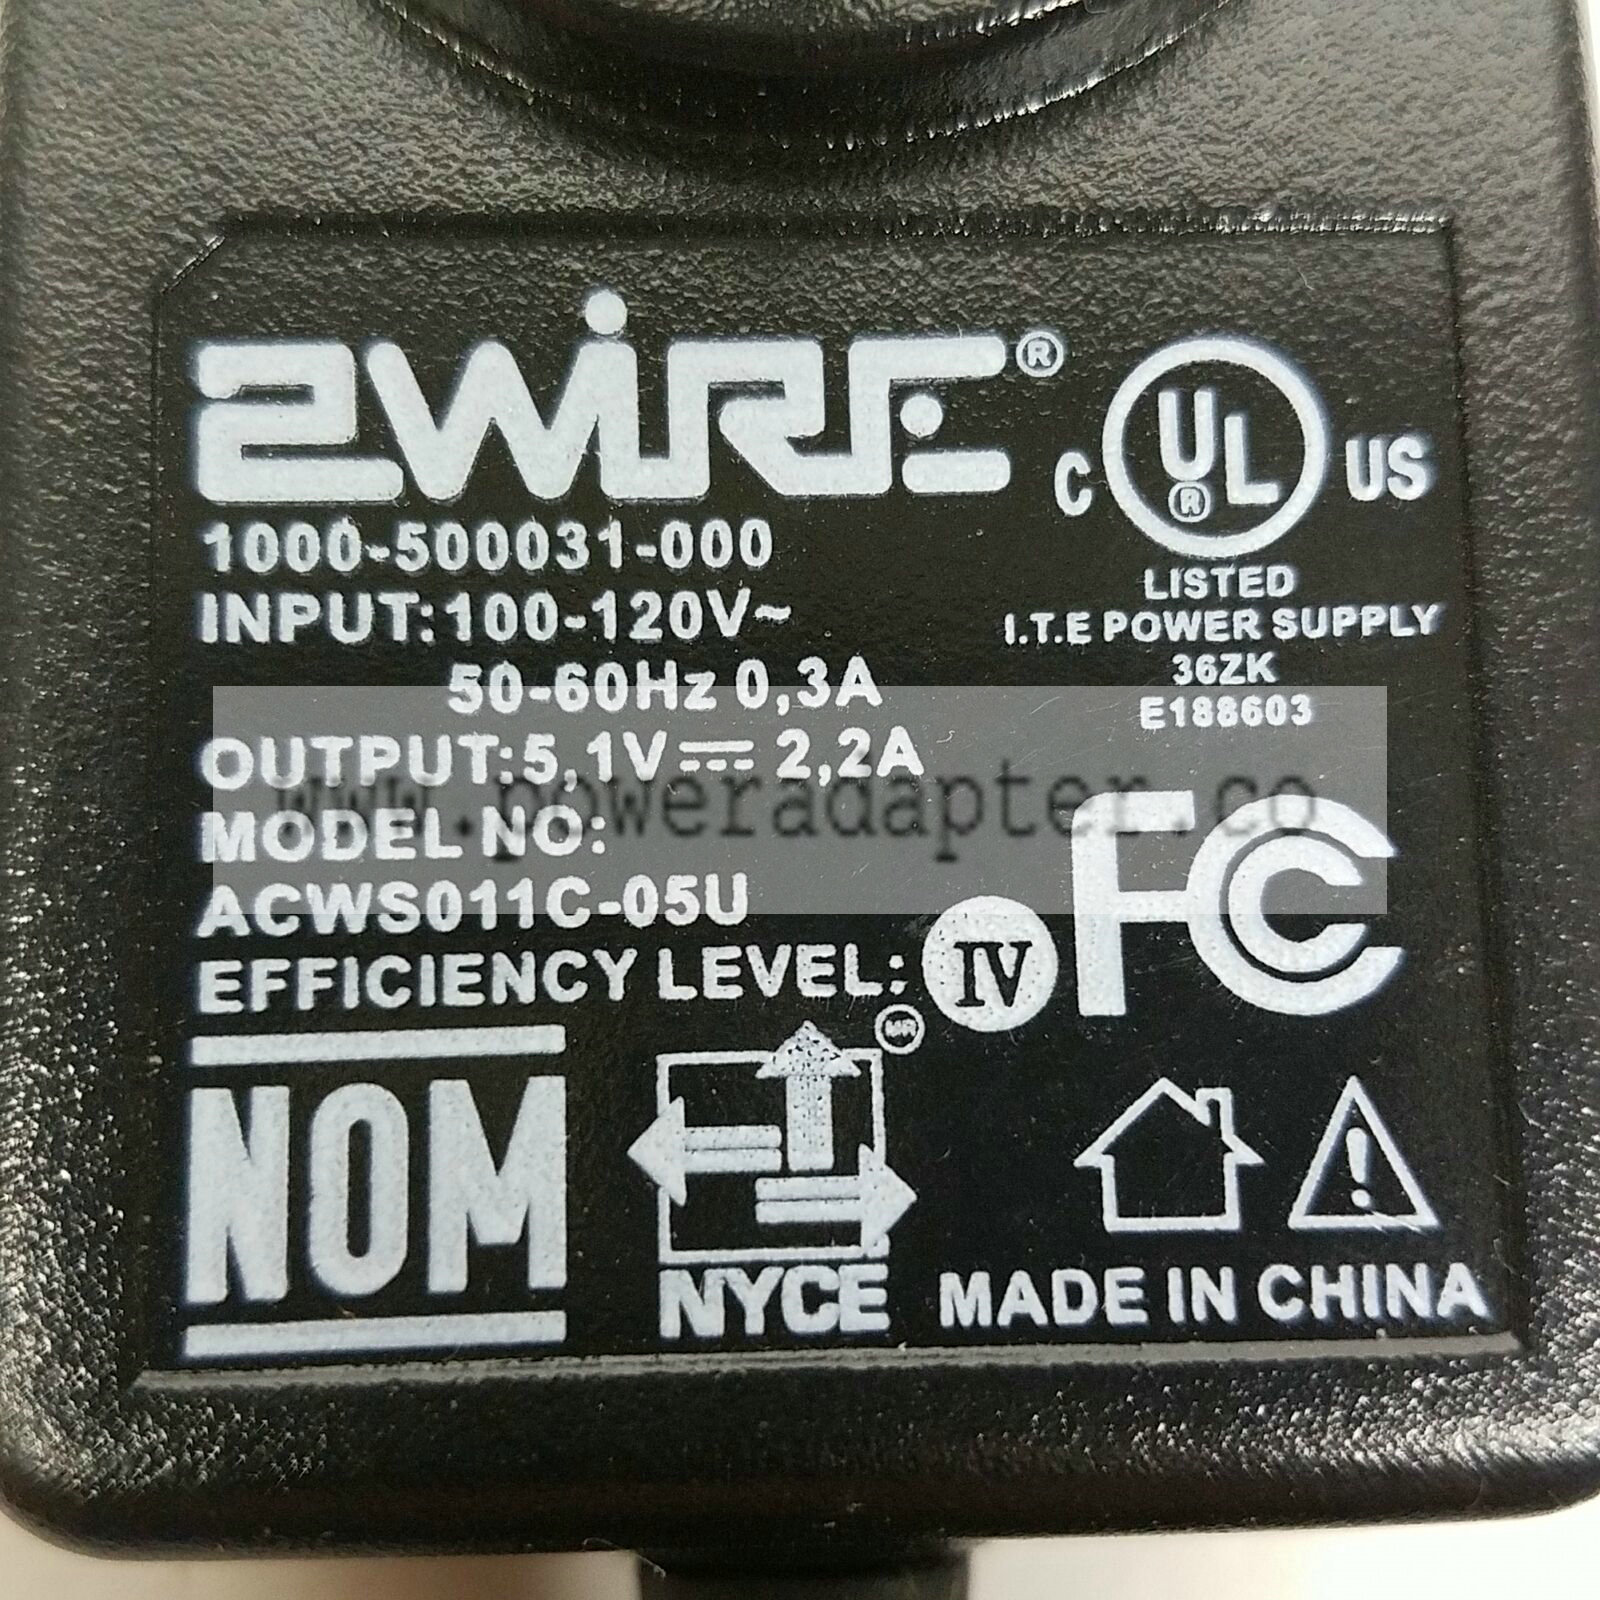 2Wire ACWS011C-05U 1000-500031-000 AC Power Supply Adapter 5.1V 2.2A Brand: 2Wire MPN: 1000-500031-000 Model: ACWS